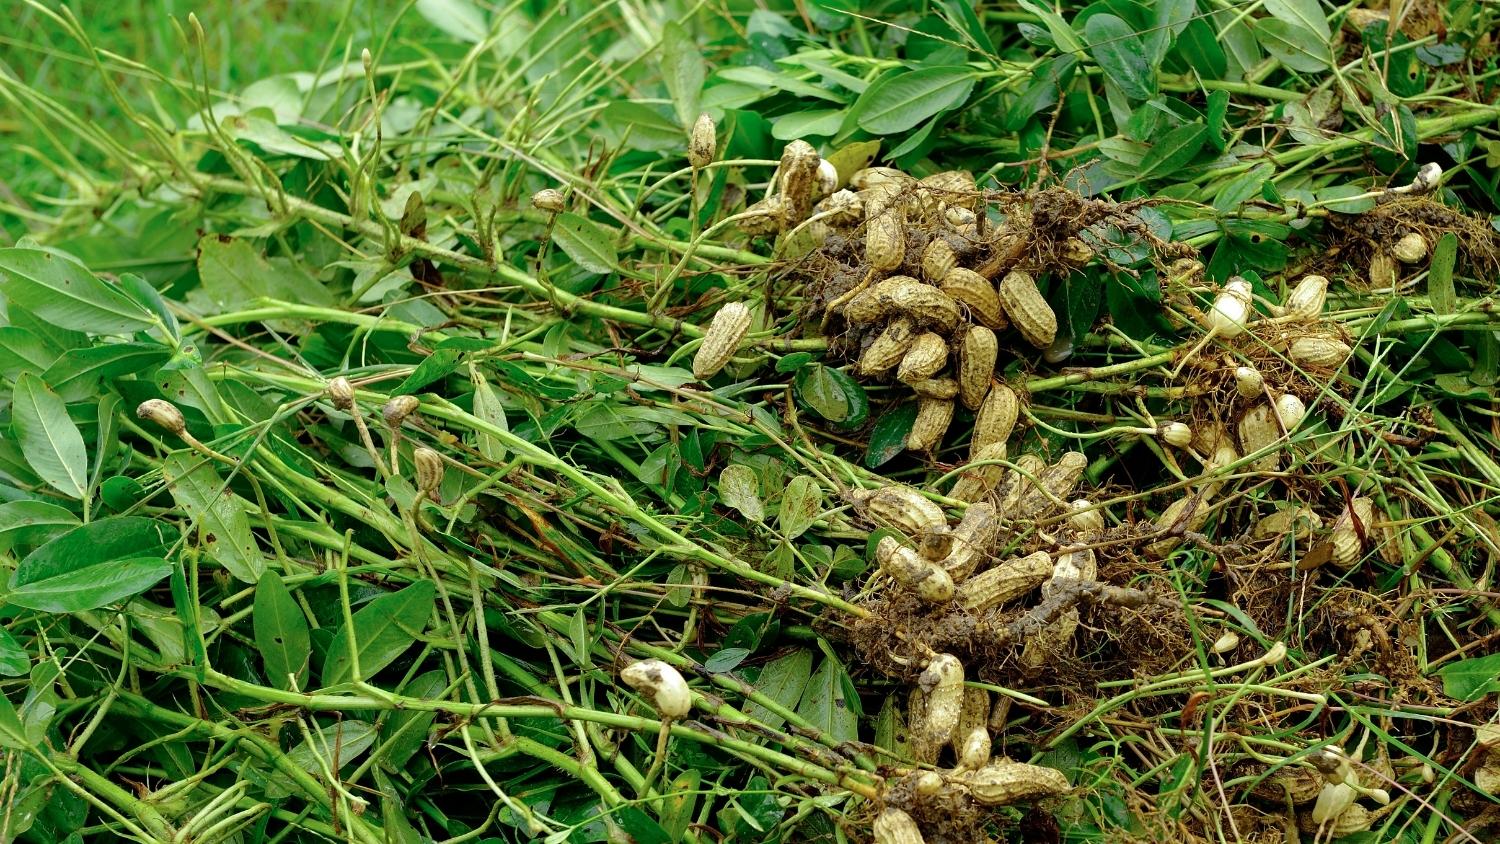 Harvested peanuts still on the stem in a field